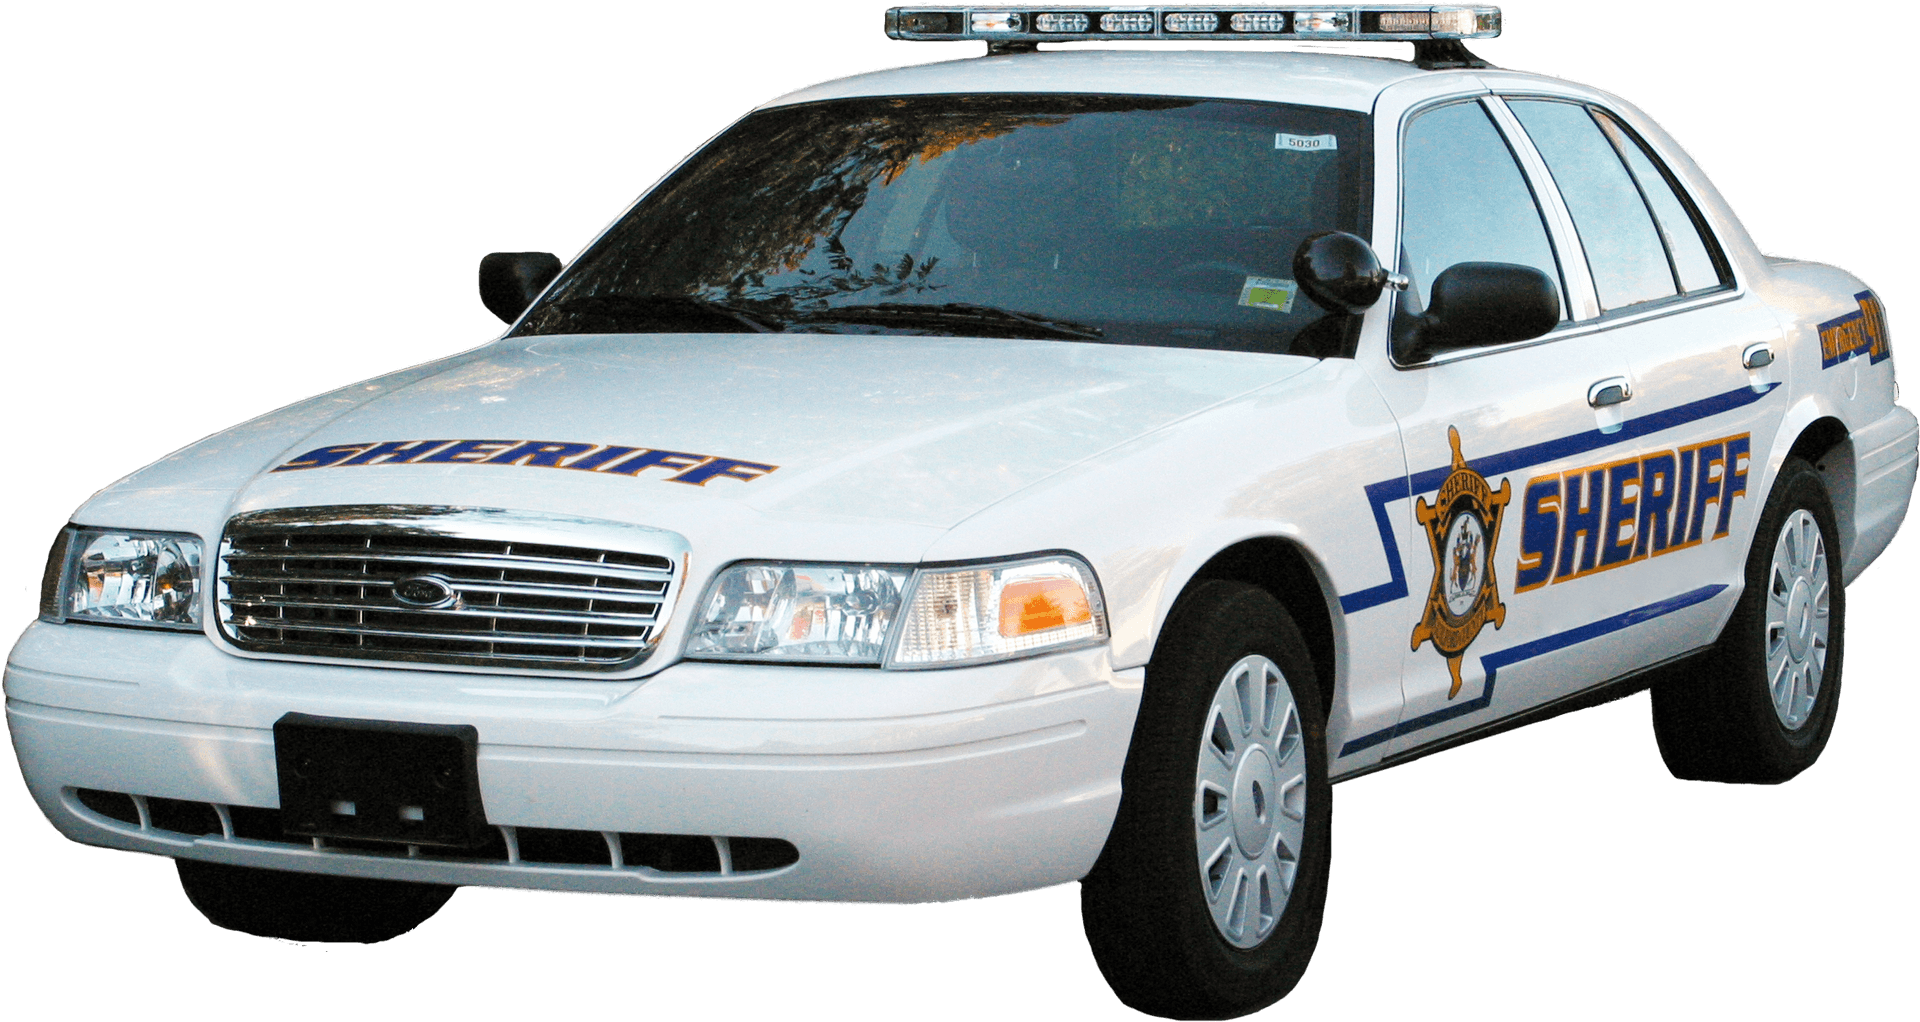 Sheriff Police Car Ford Crown Victoria PNG image